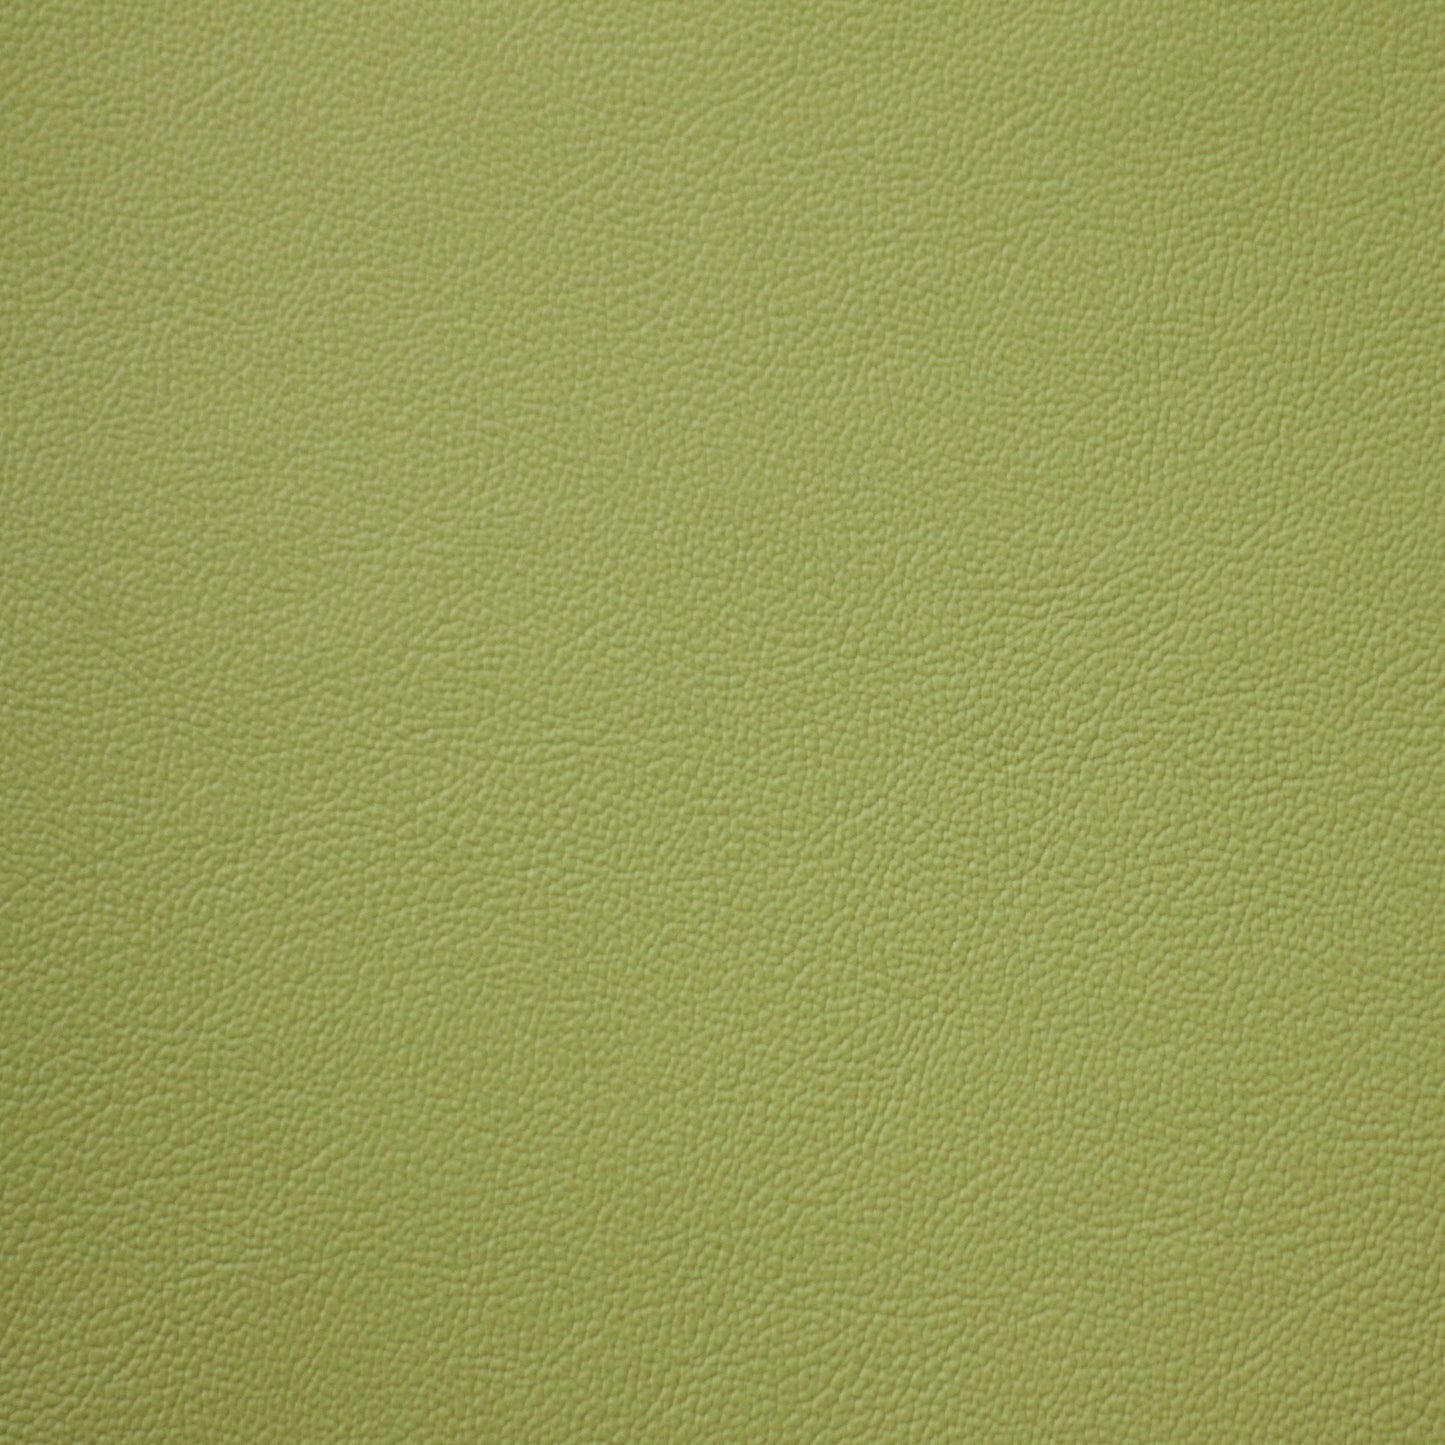 Empire, Mantis, Iconic® Antimicrobial & Cleanable, Hospitality Leather Hide